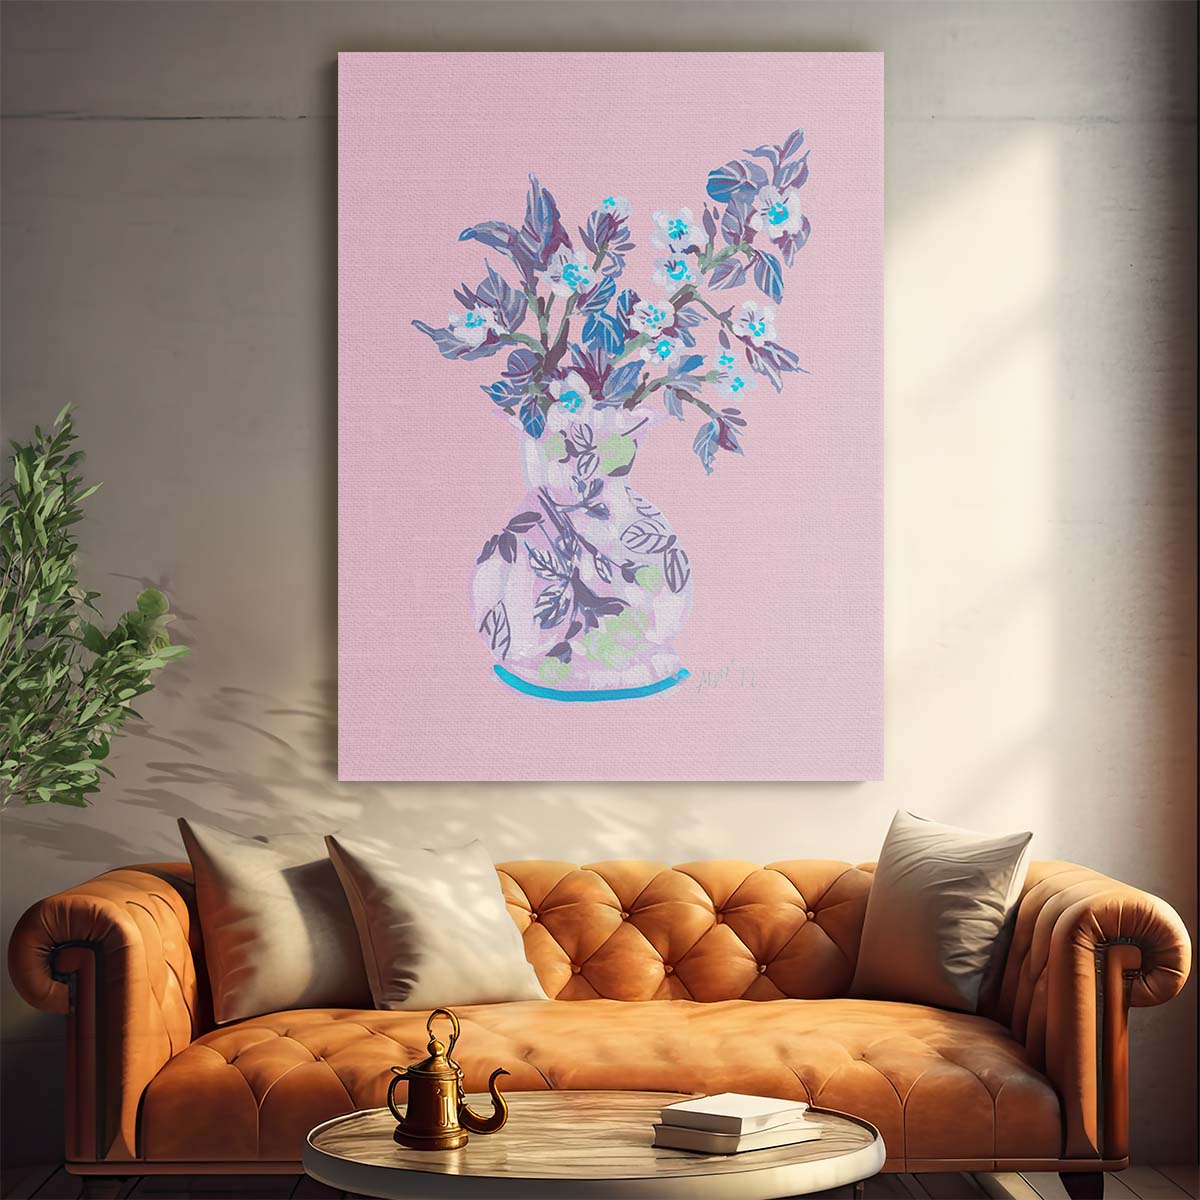 Bright Pink Apple Blossom Botanical Illustration in Neon Blue Vase by Luxuriance Designs, made in USA